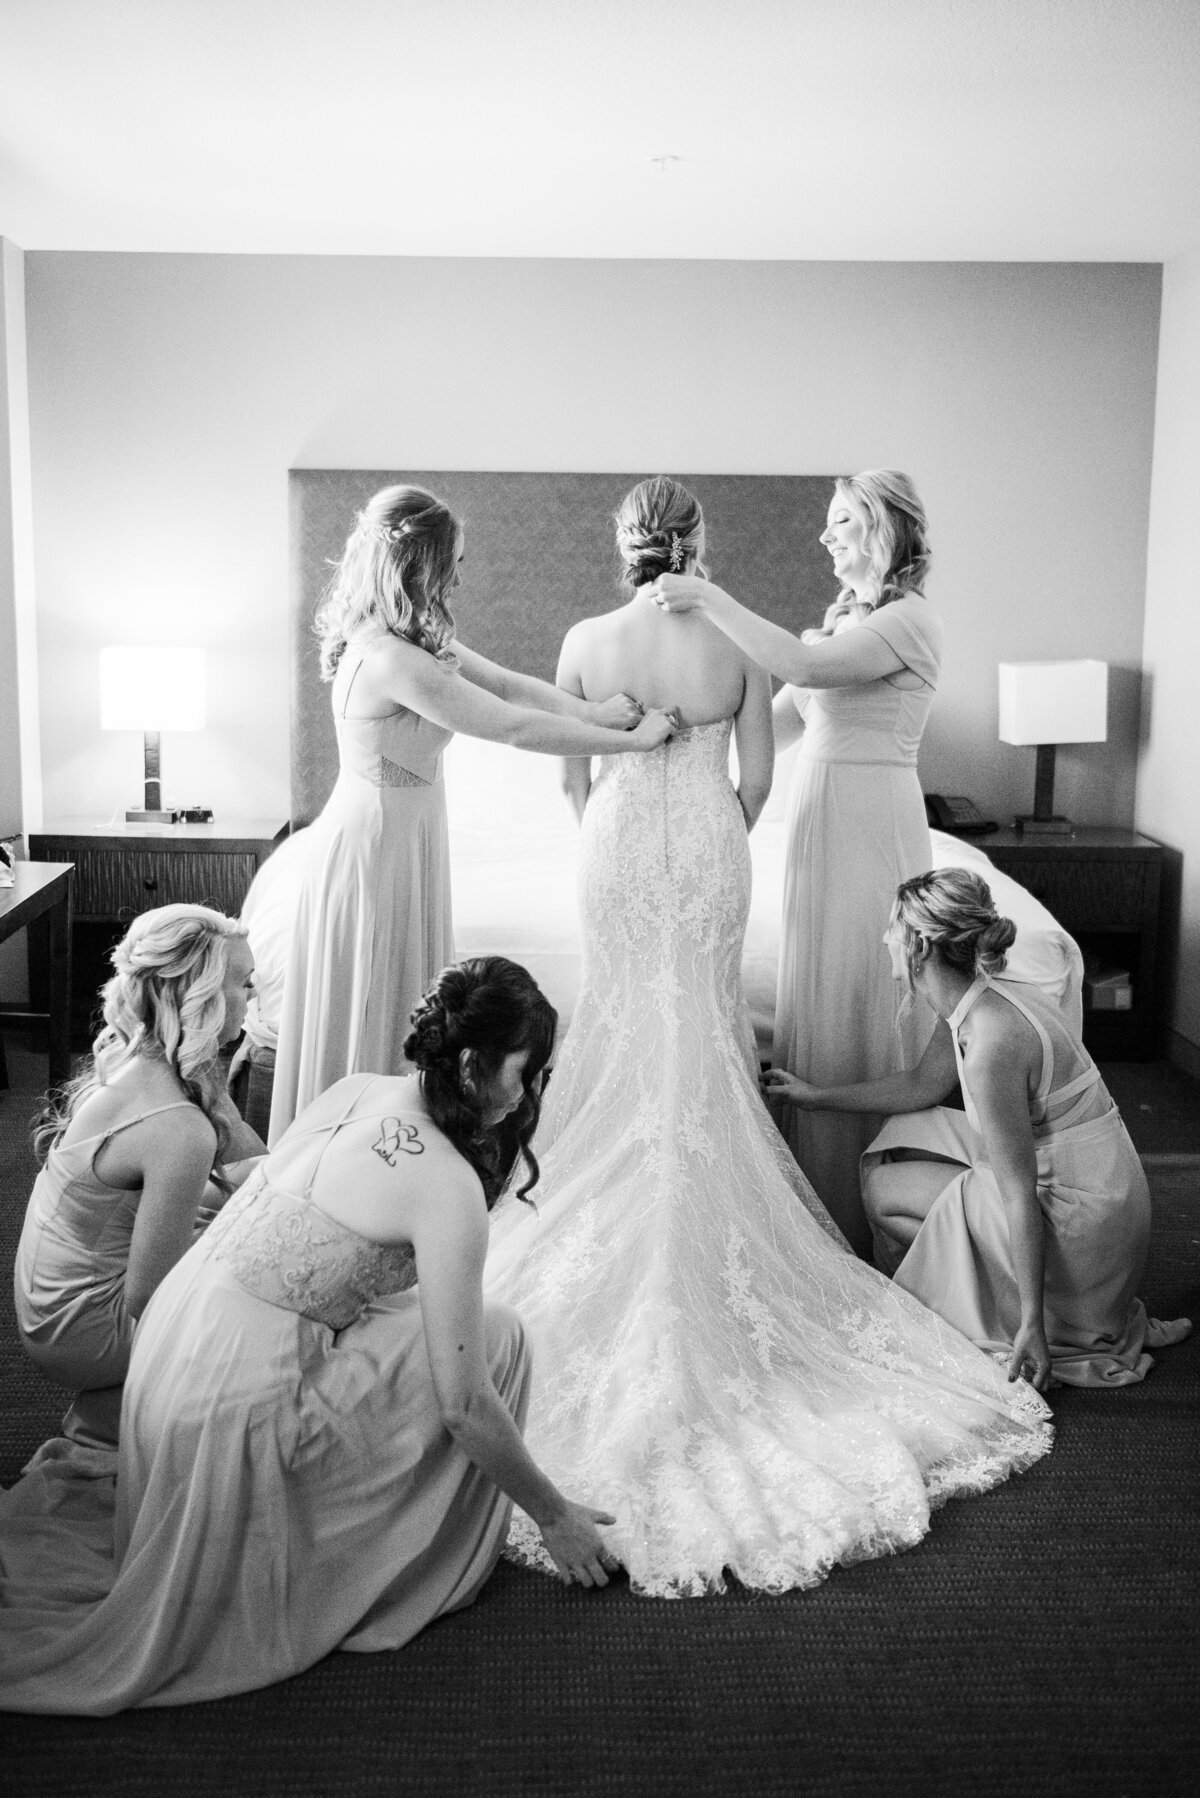 A bride faces away from the camera as all her bridesmaids adjust her wedding dress and train.